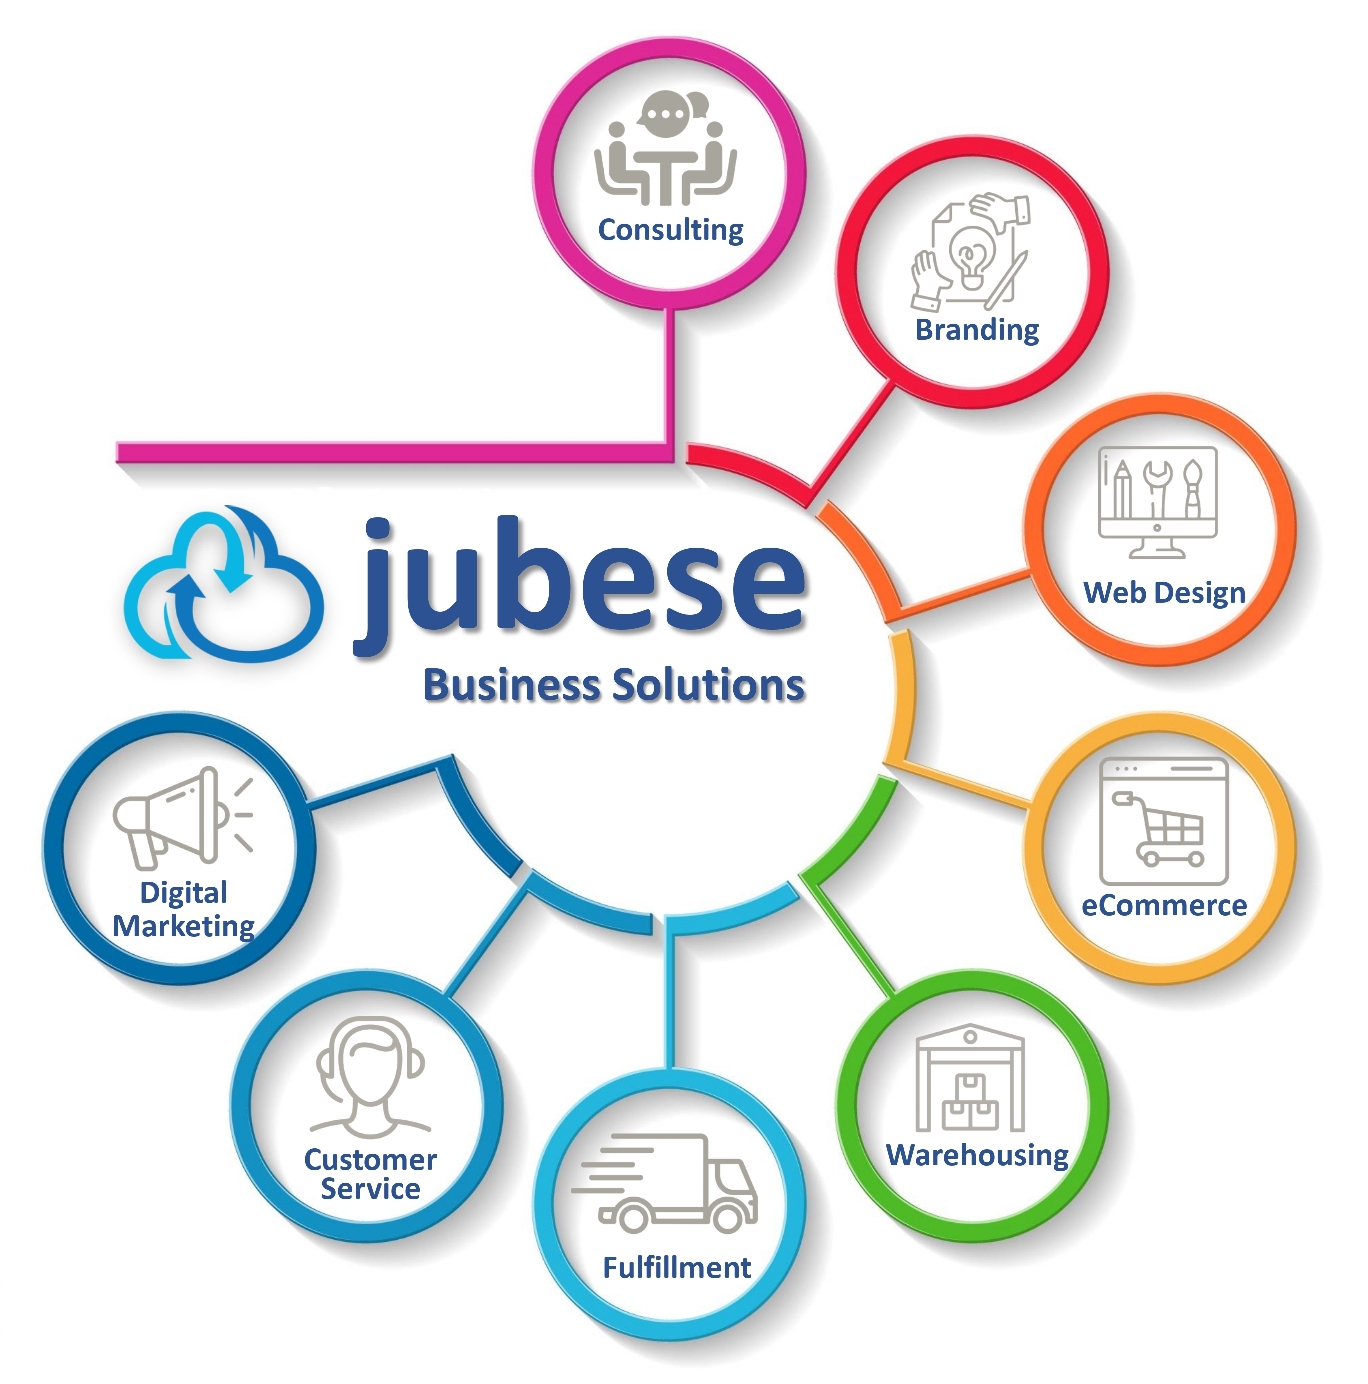 Jubese - Business Solutions - Services Graph